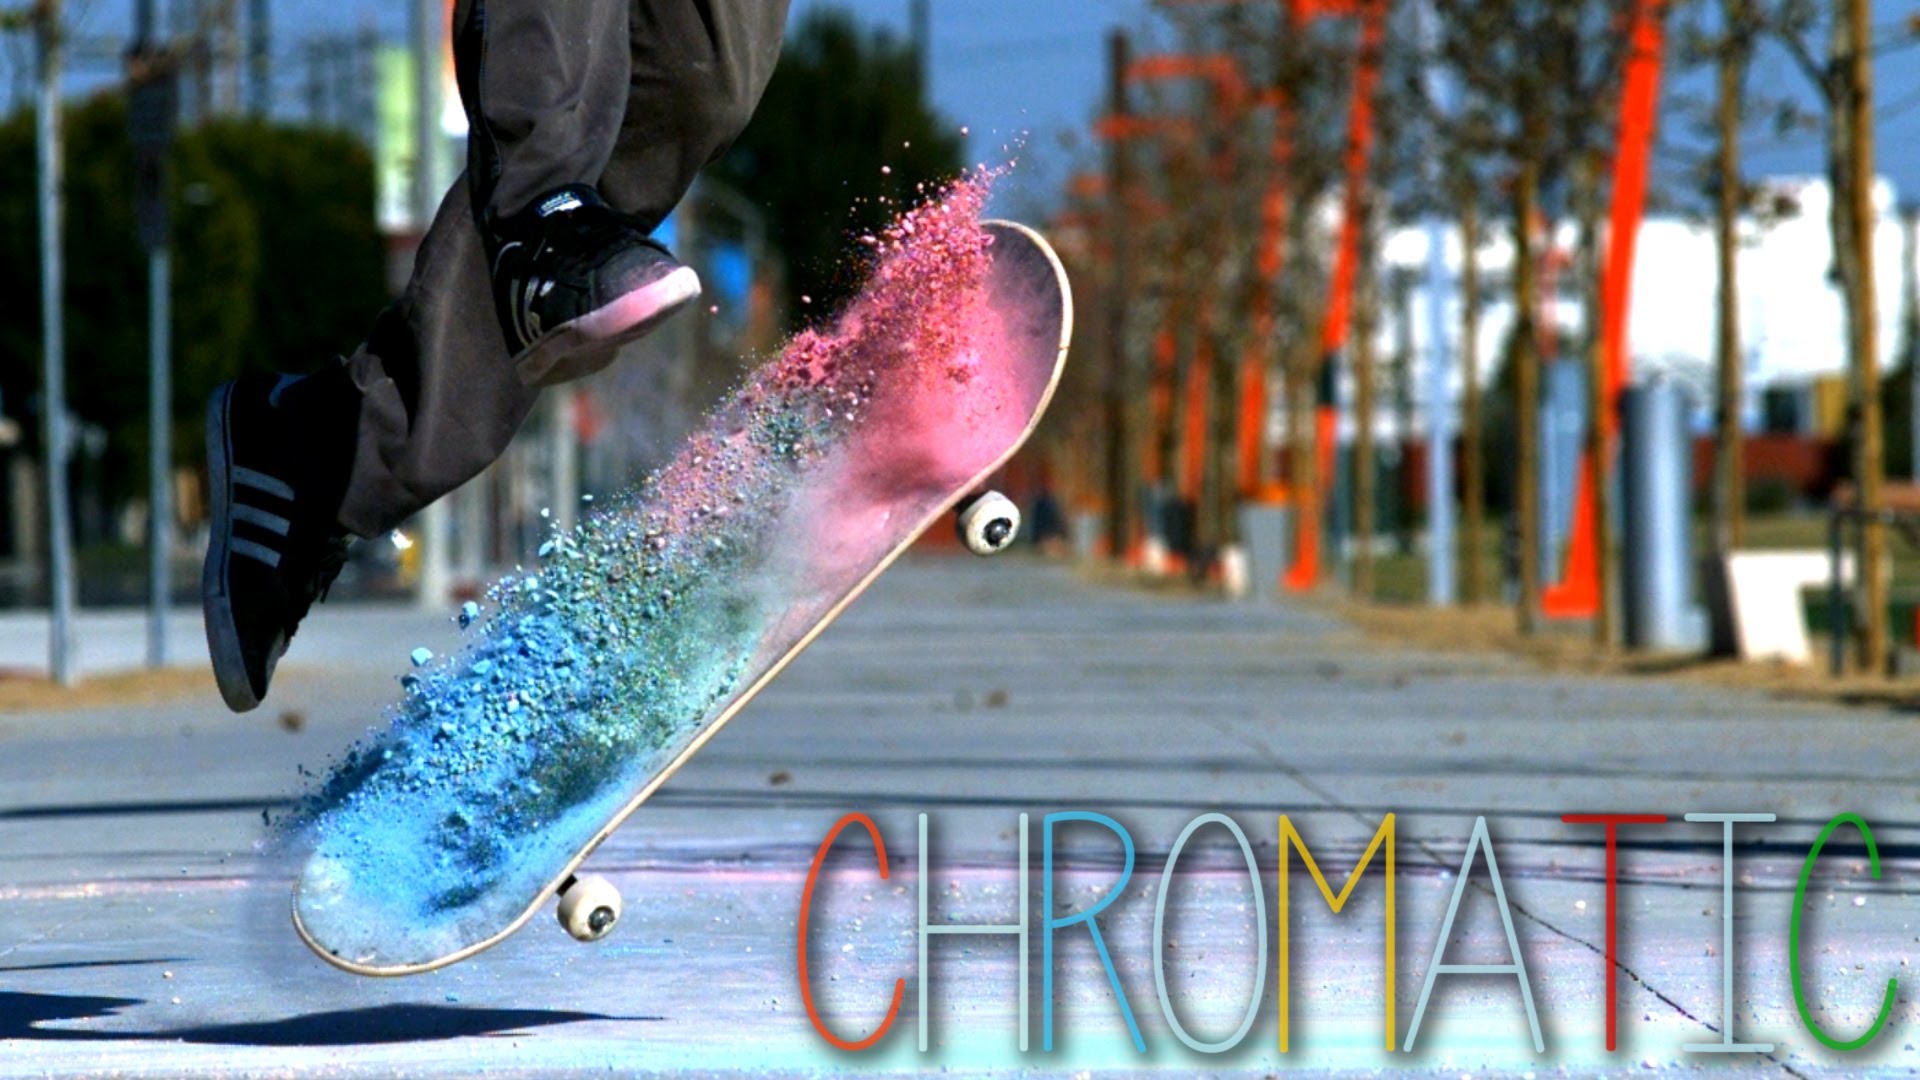 Chromatic: Skating in slow motion with chalk